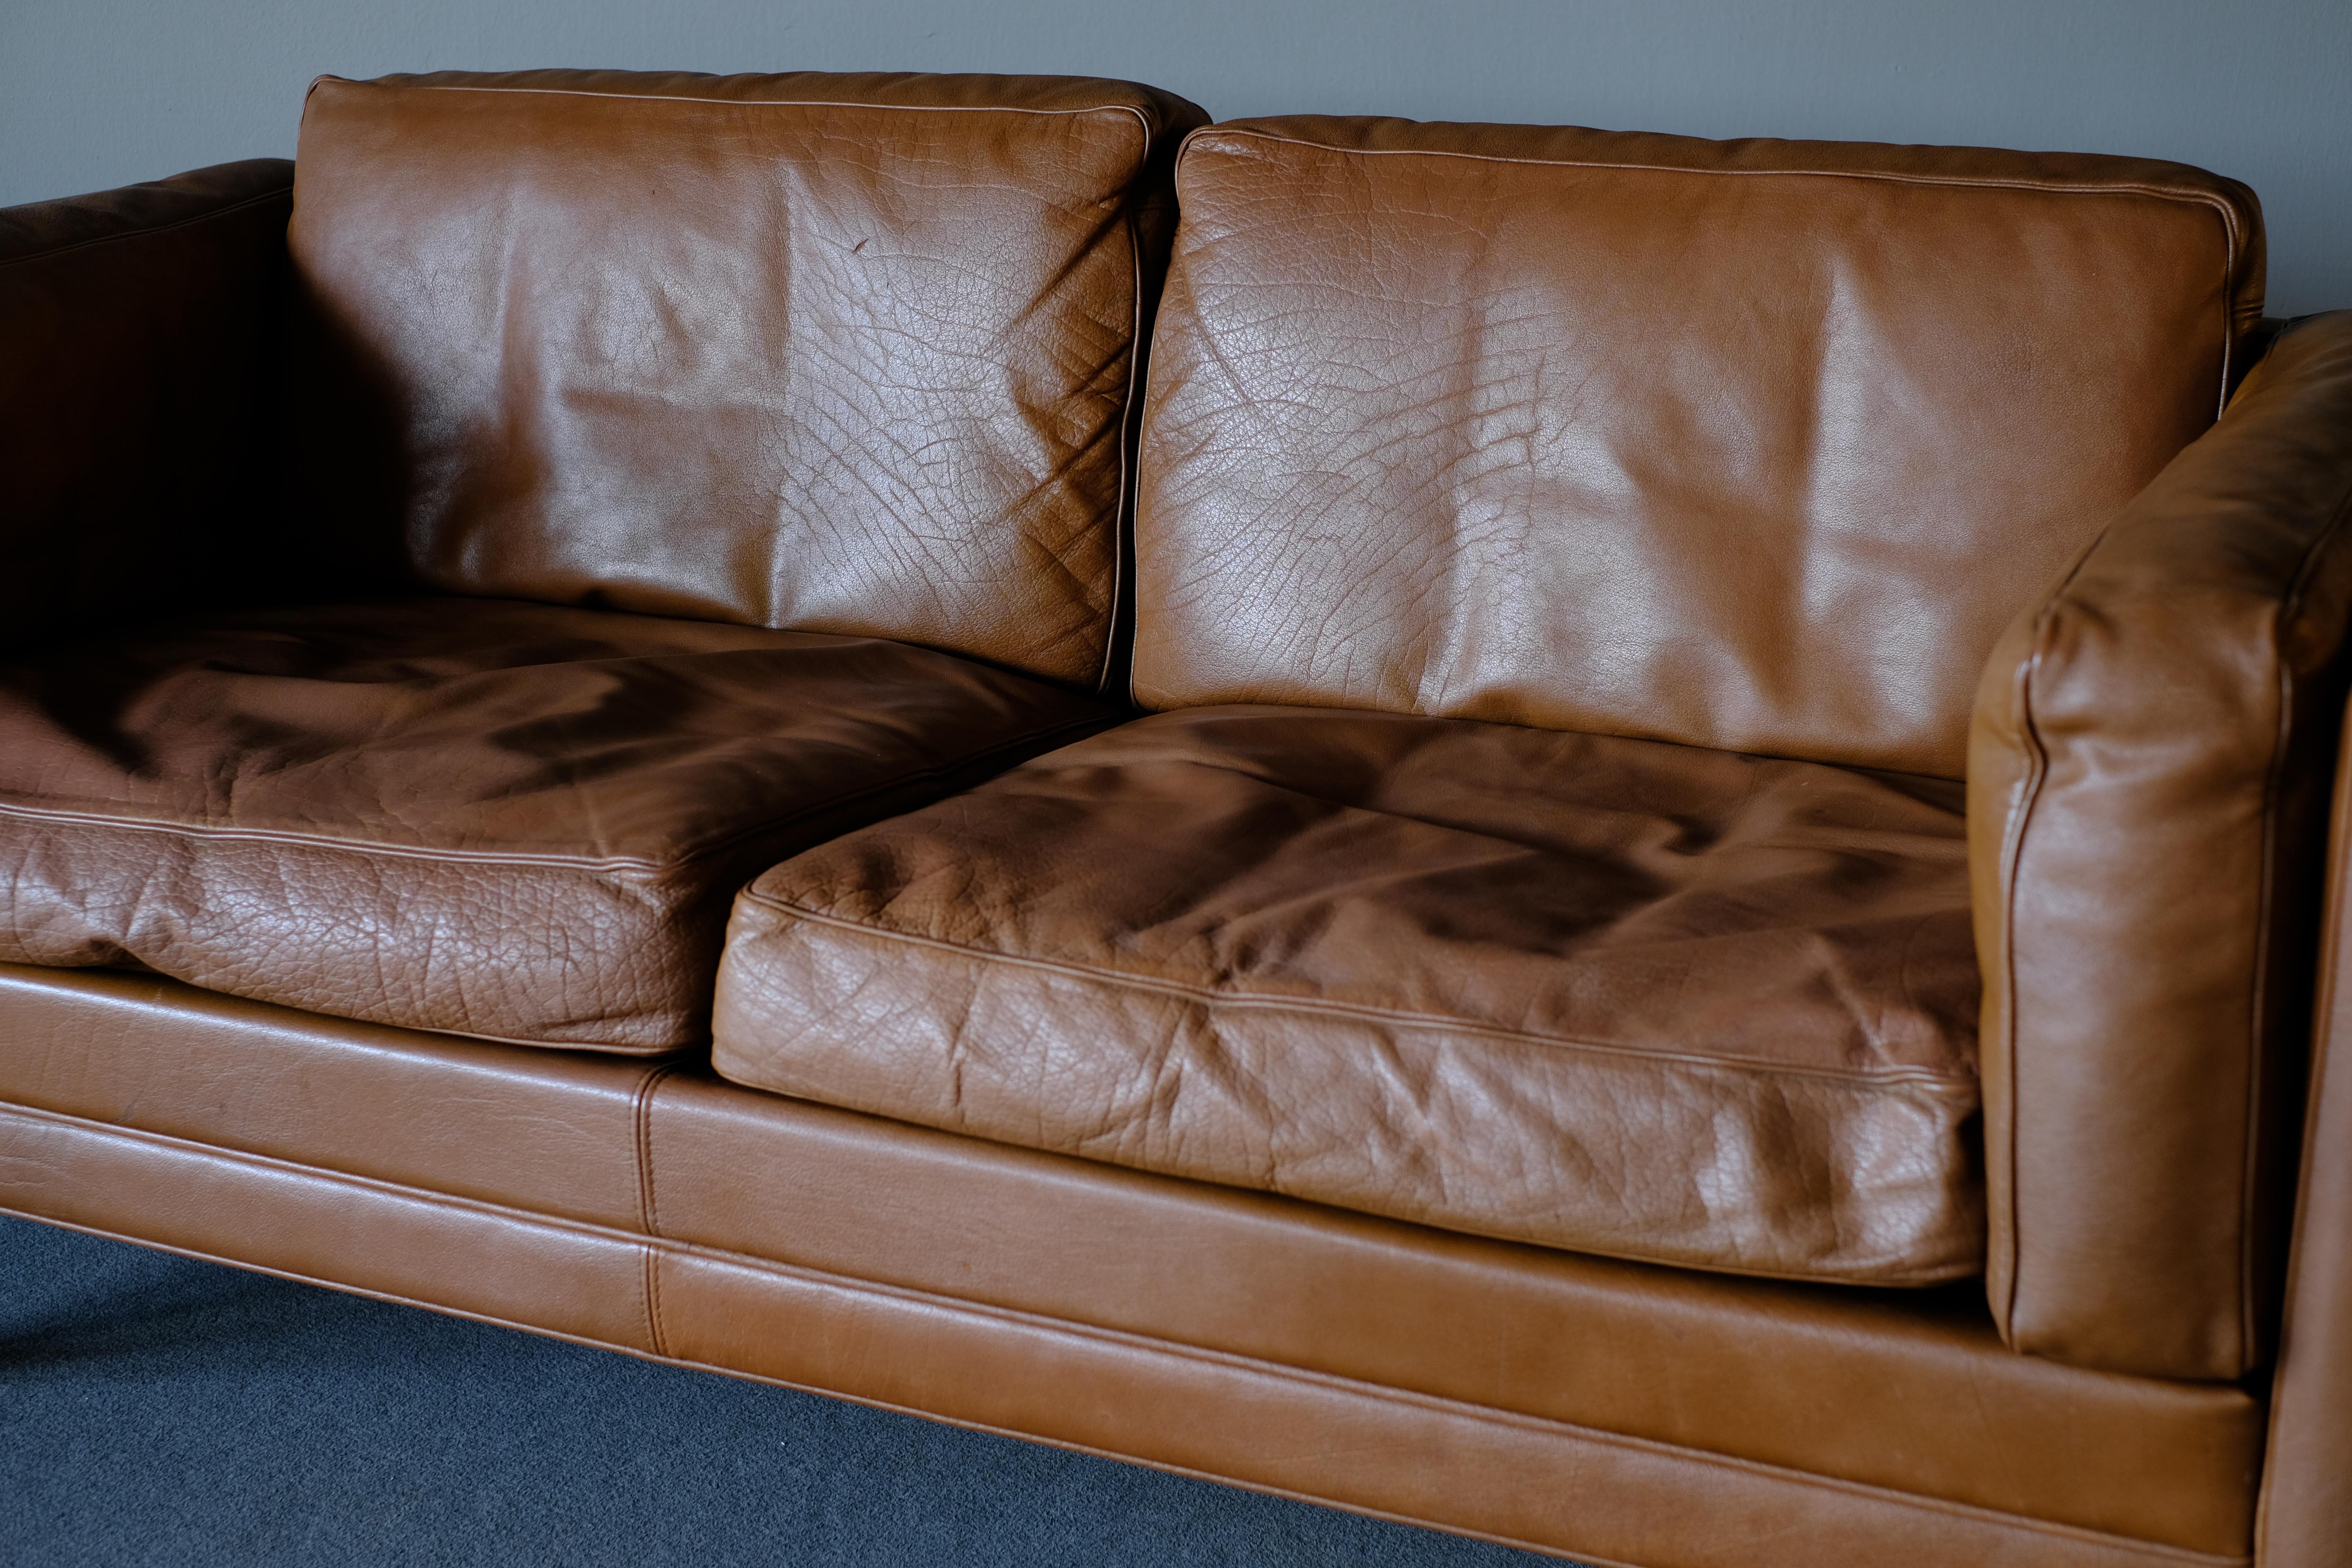 Wonderful 2-seat sofa, model V11 upholstered in brown leather designed by Illum Wikkelso for Holgar Christiansen in 1960s-1970s. This sofa comes with its fully original upholstery of high quality brown leather in all its patinated glory. The tapered